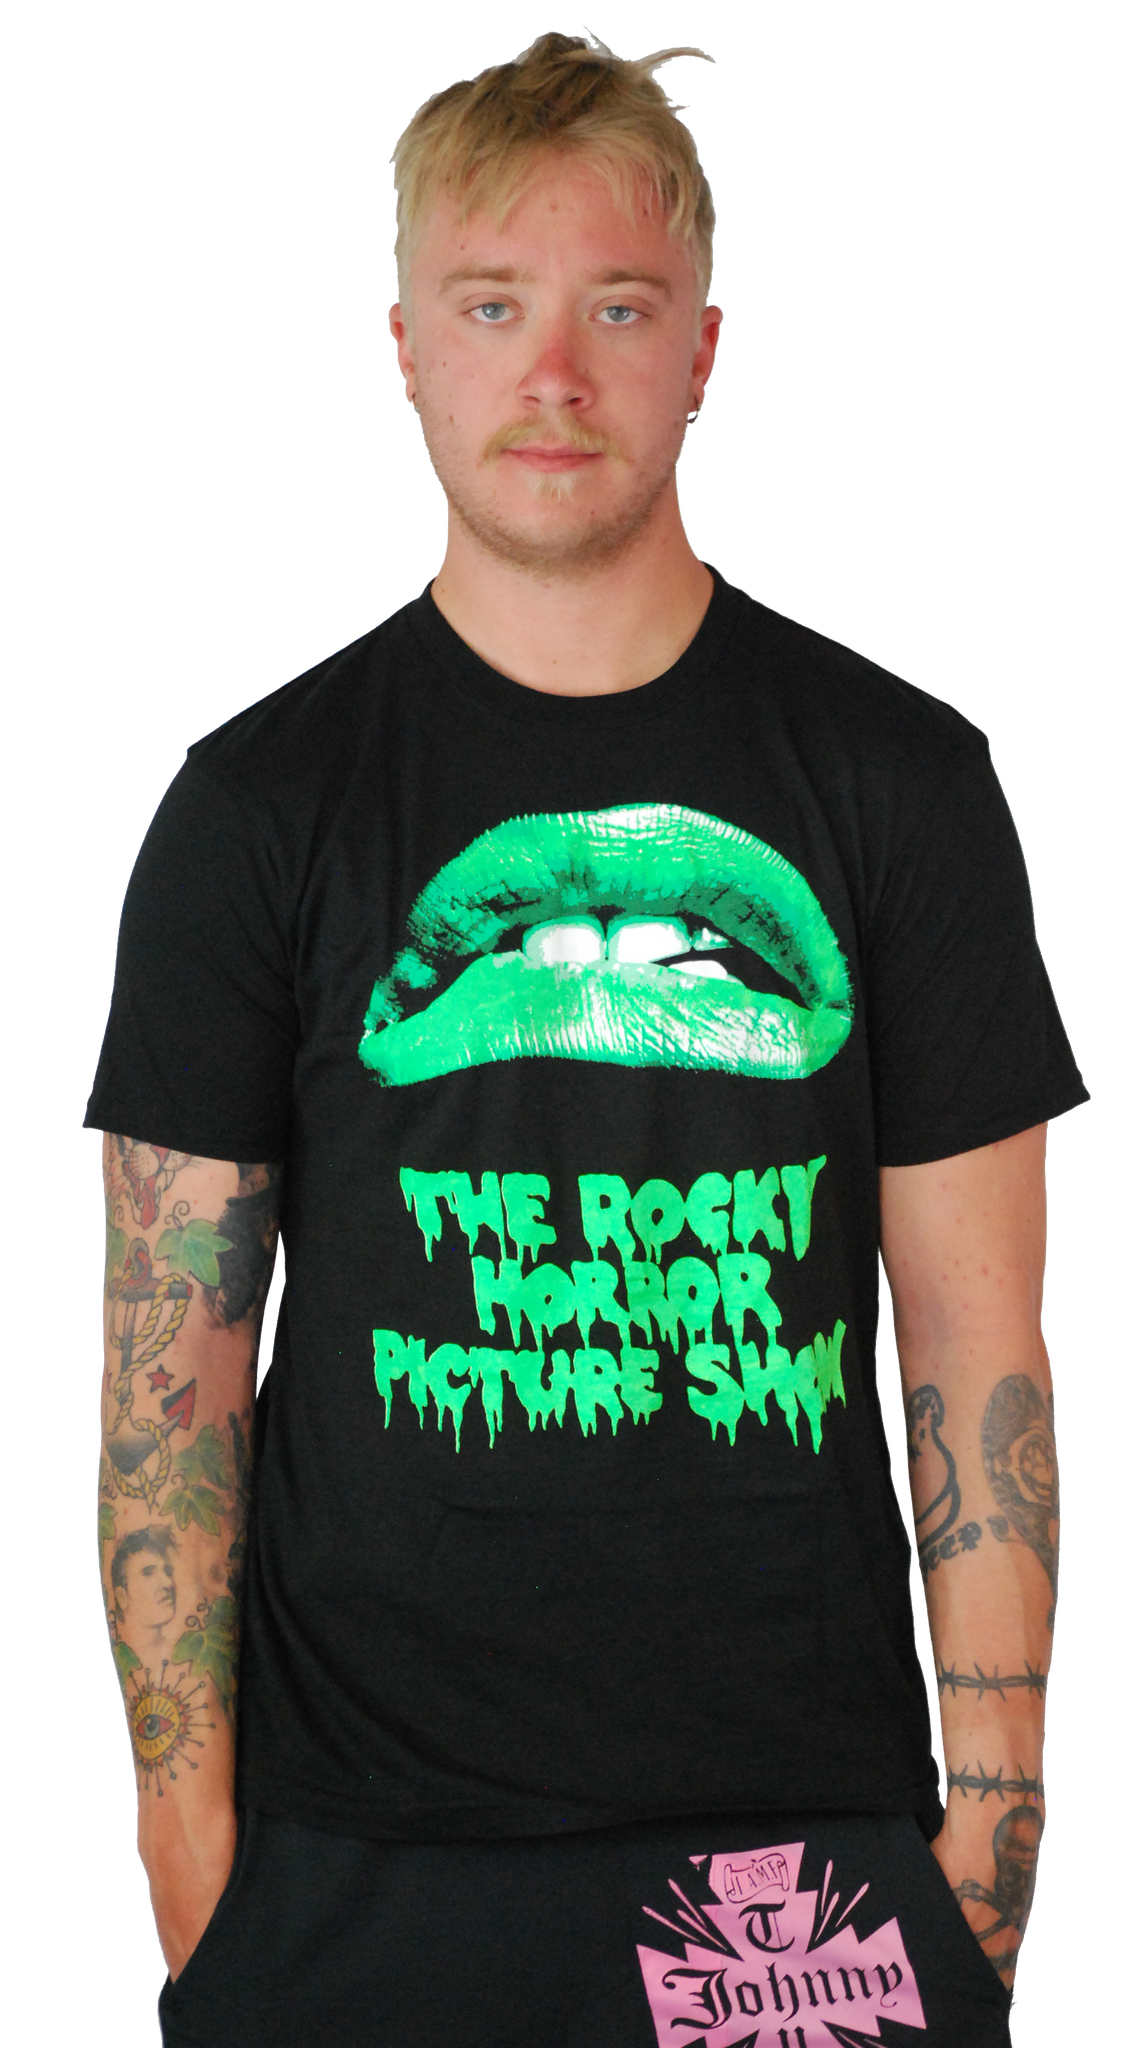 ROCKY HORROR PICTURE SHOW CLASSIC LIMITED EDITION NEON GREEN BLACK T-SHIRT